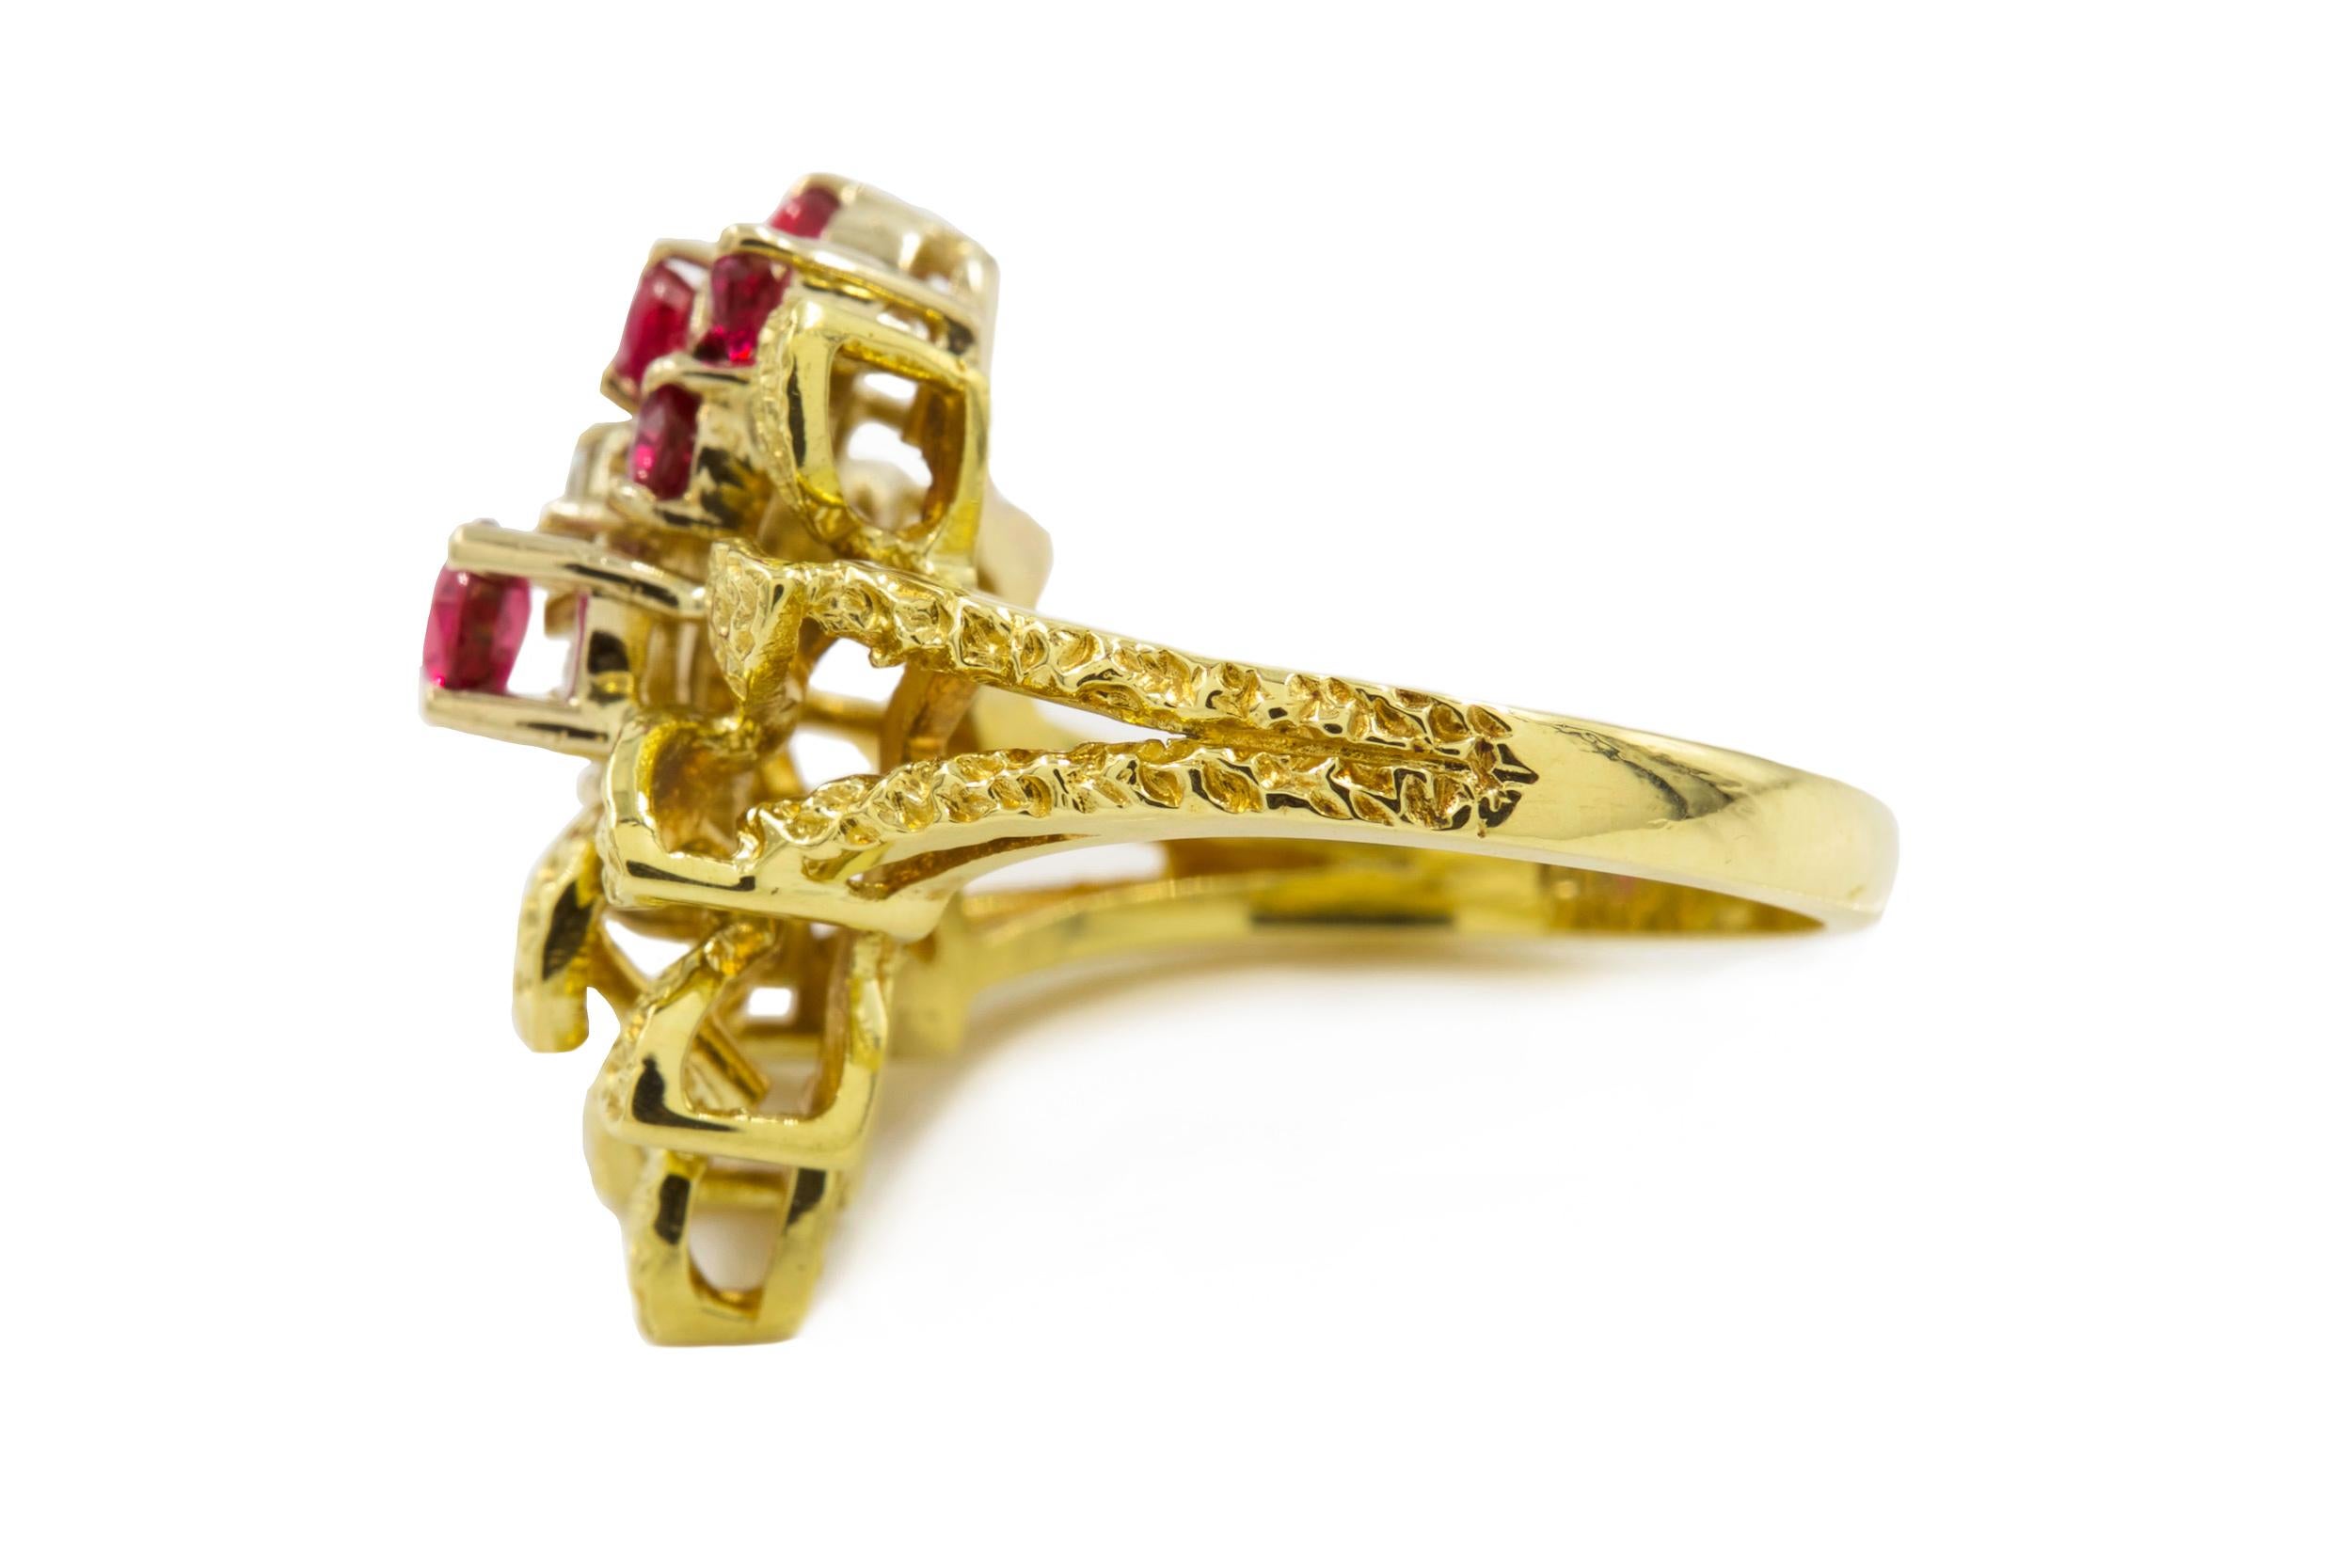 Vintage 14k Yellow Gold, Ruby and Diamond Cocktail Ring For Sale 2